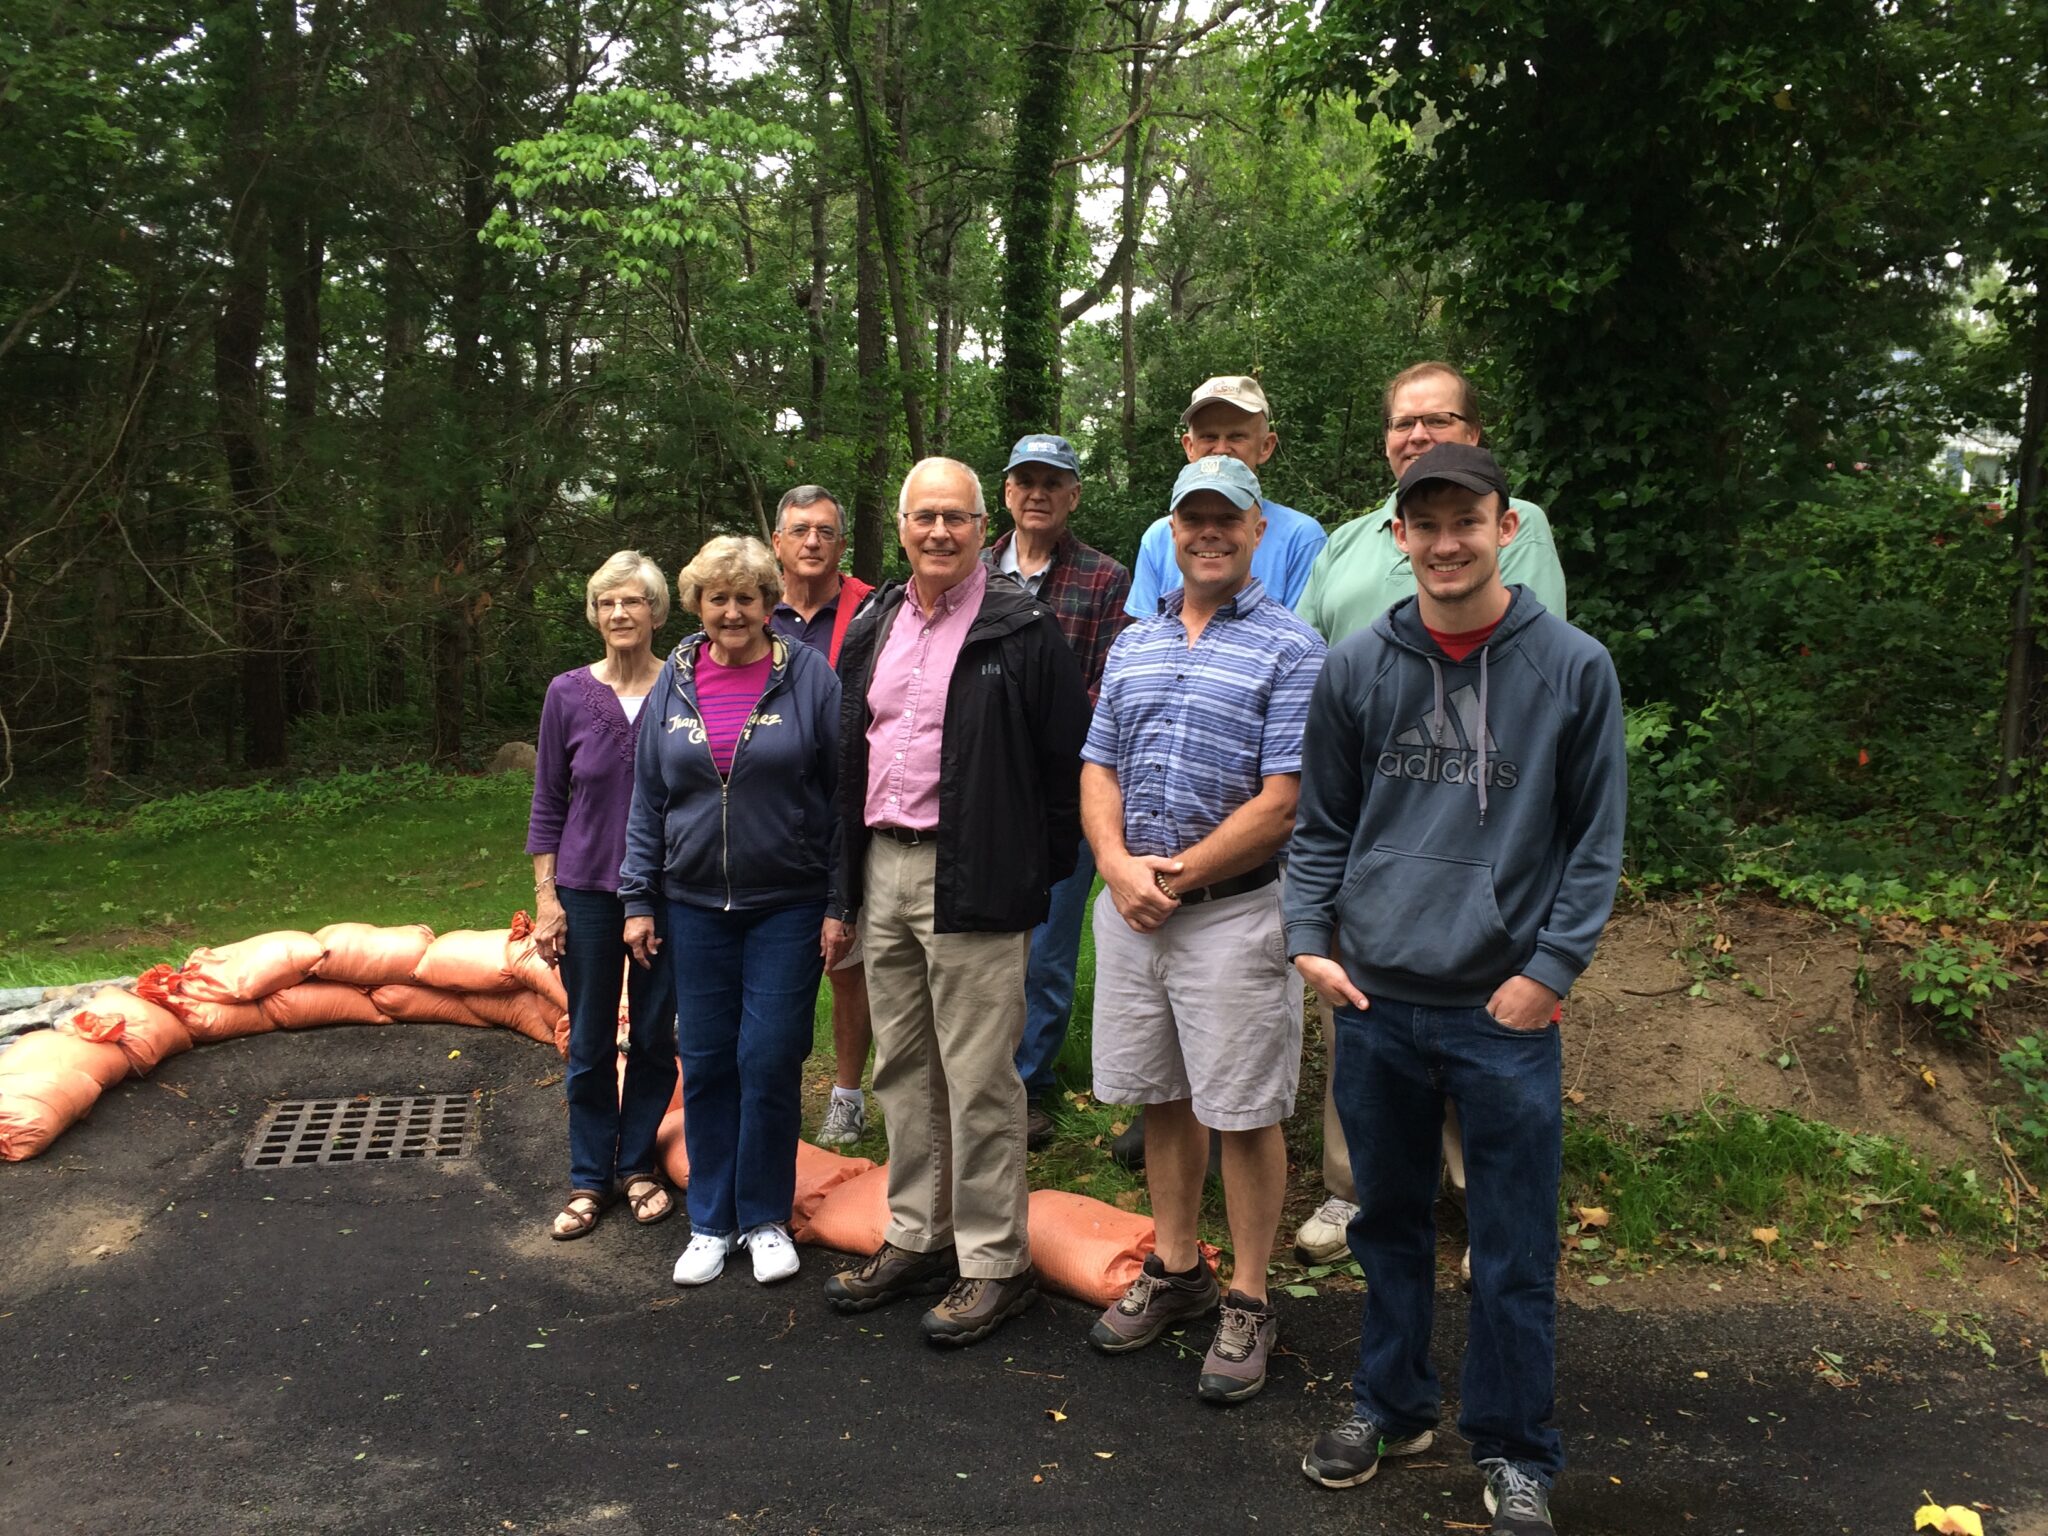 BLUEBERRY POND – A partnership in action.